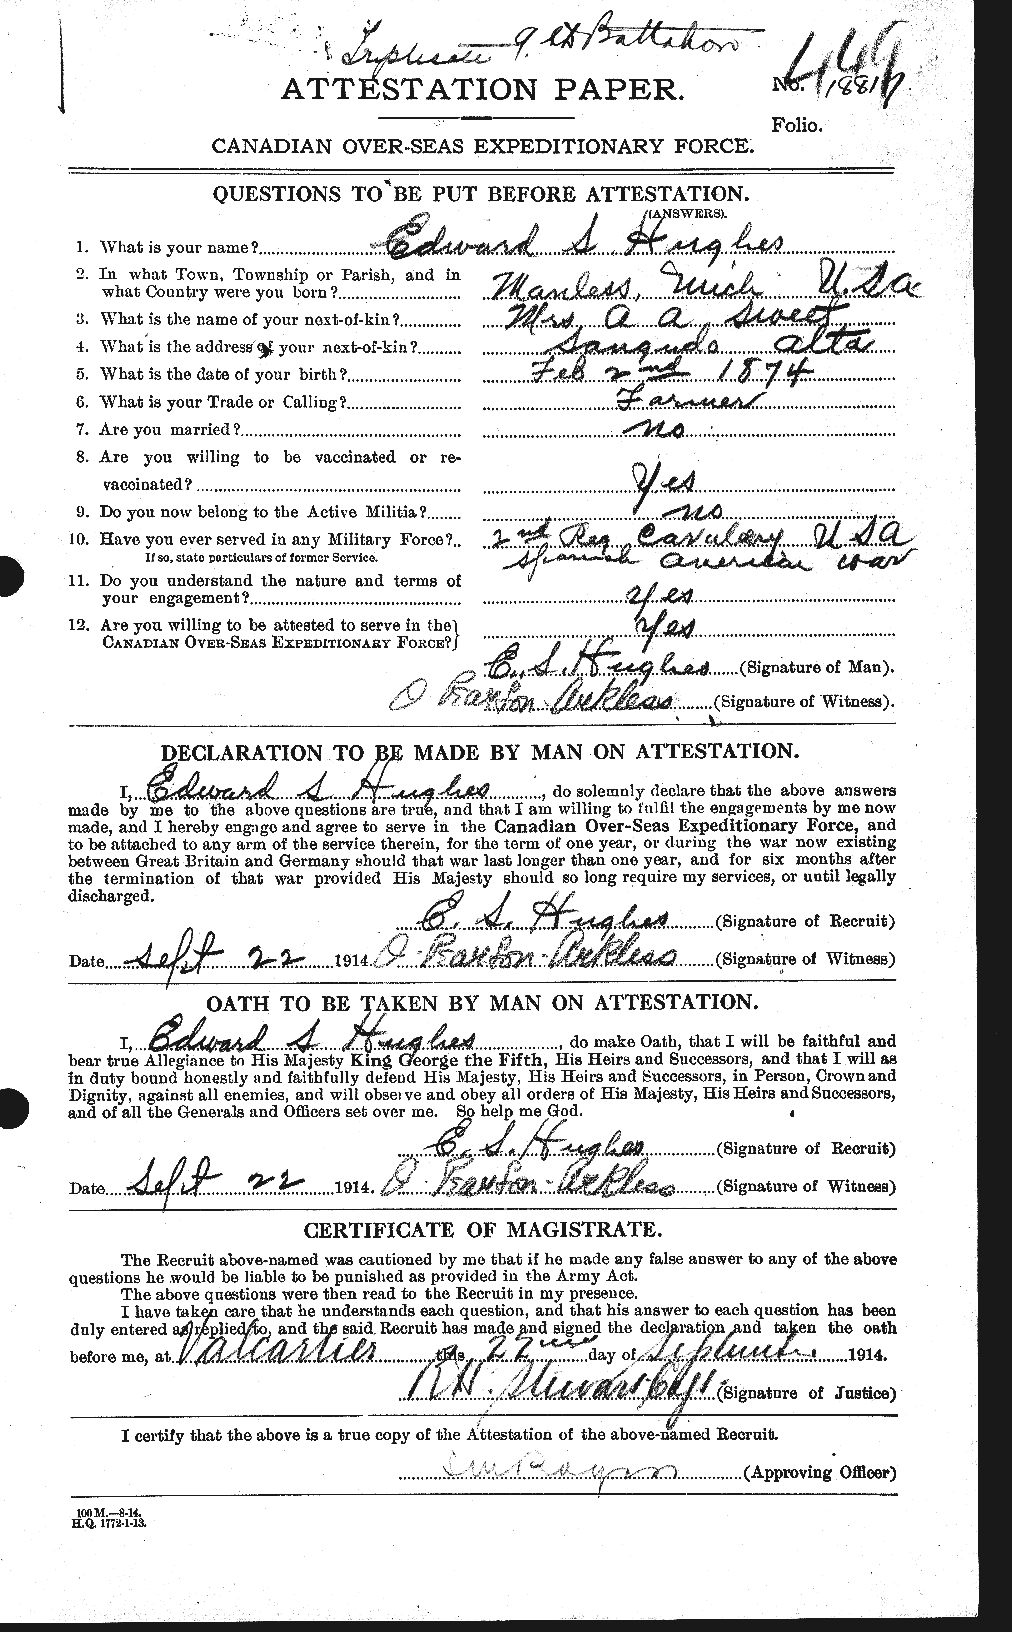 Personnel Records of the First World War - CEF 402690a